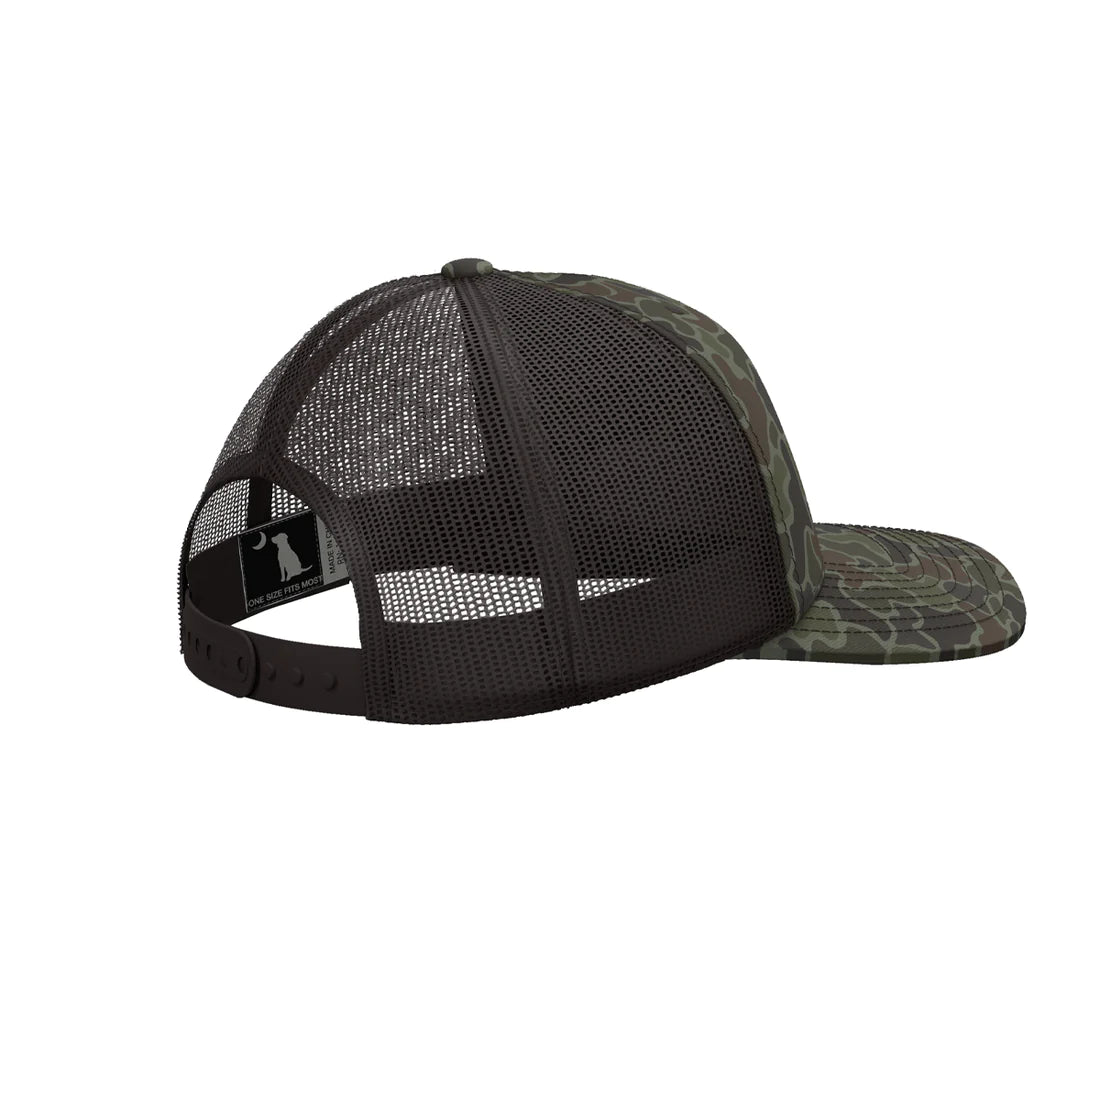 Youth - Old School Camo Leather Patch Trucker Mesh Snapback Cap